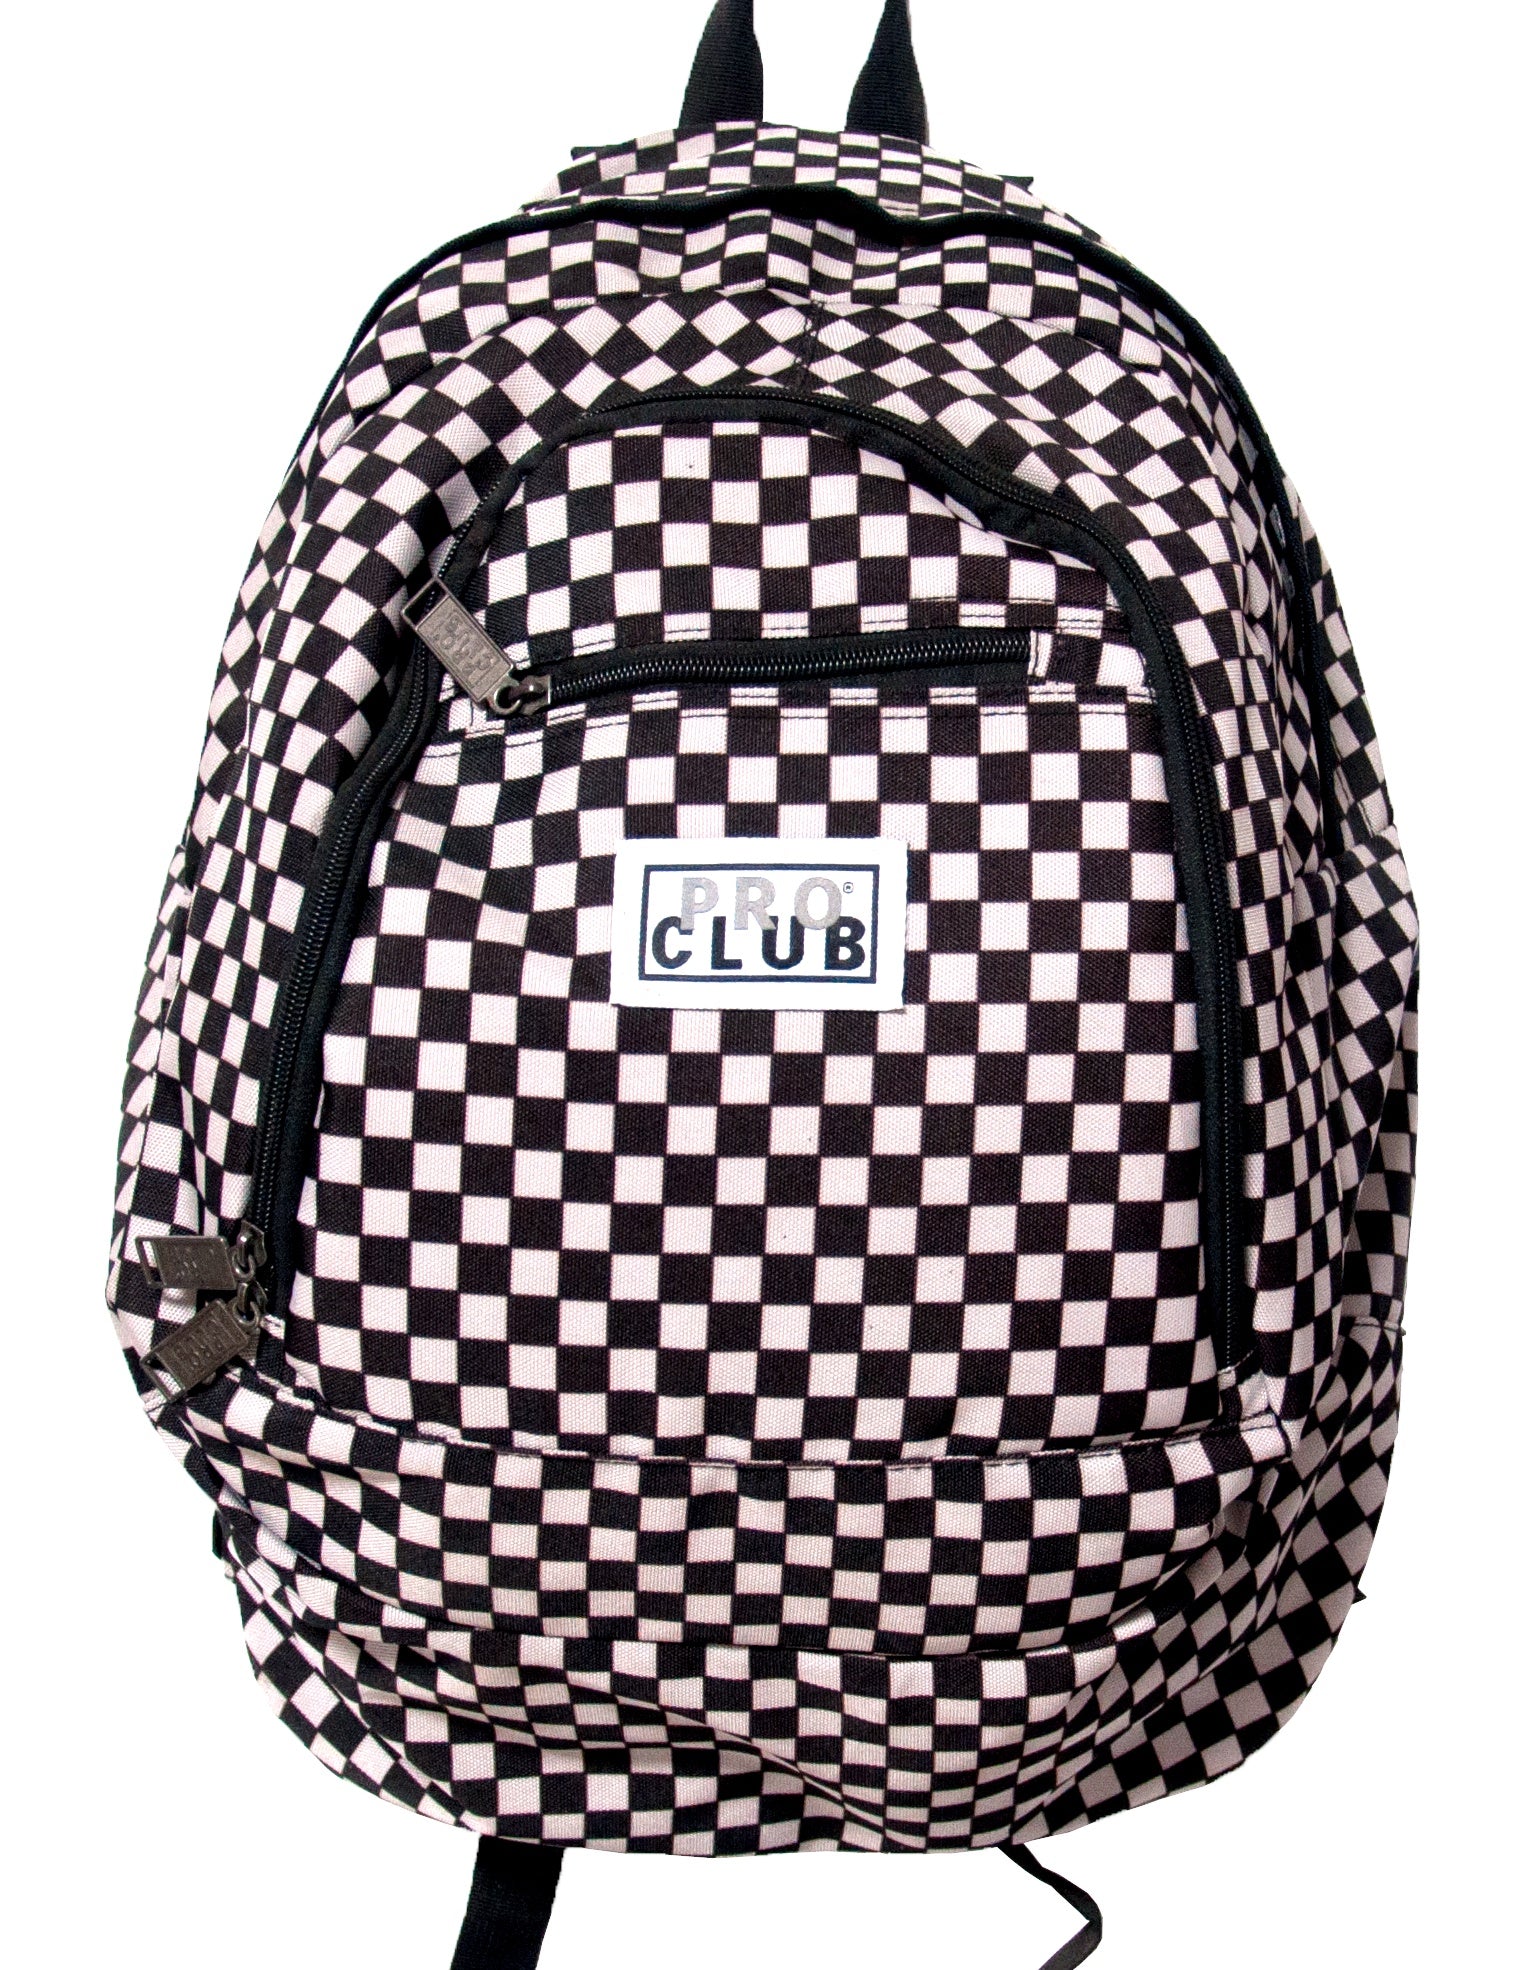 Pro Club Backpack - Square Pattern